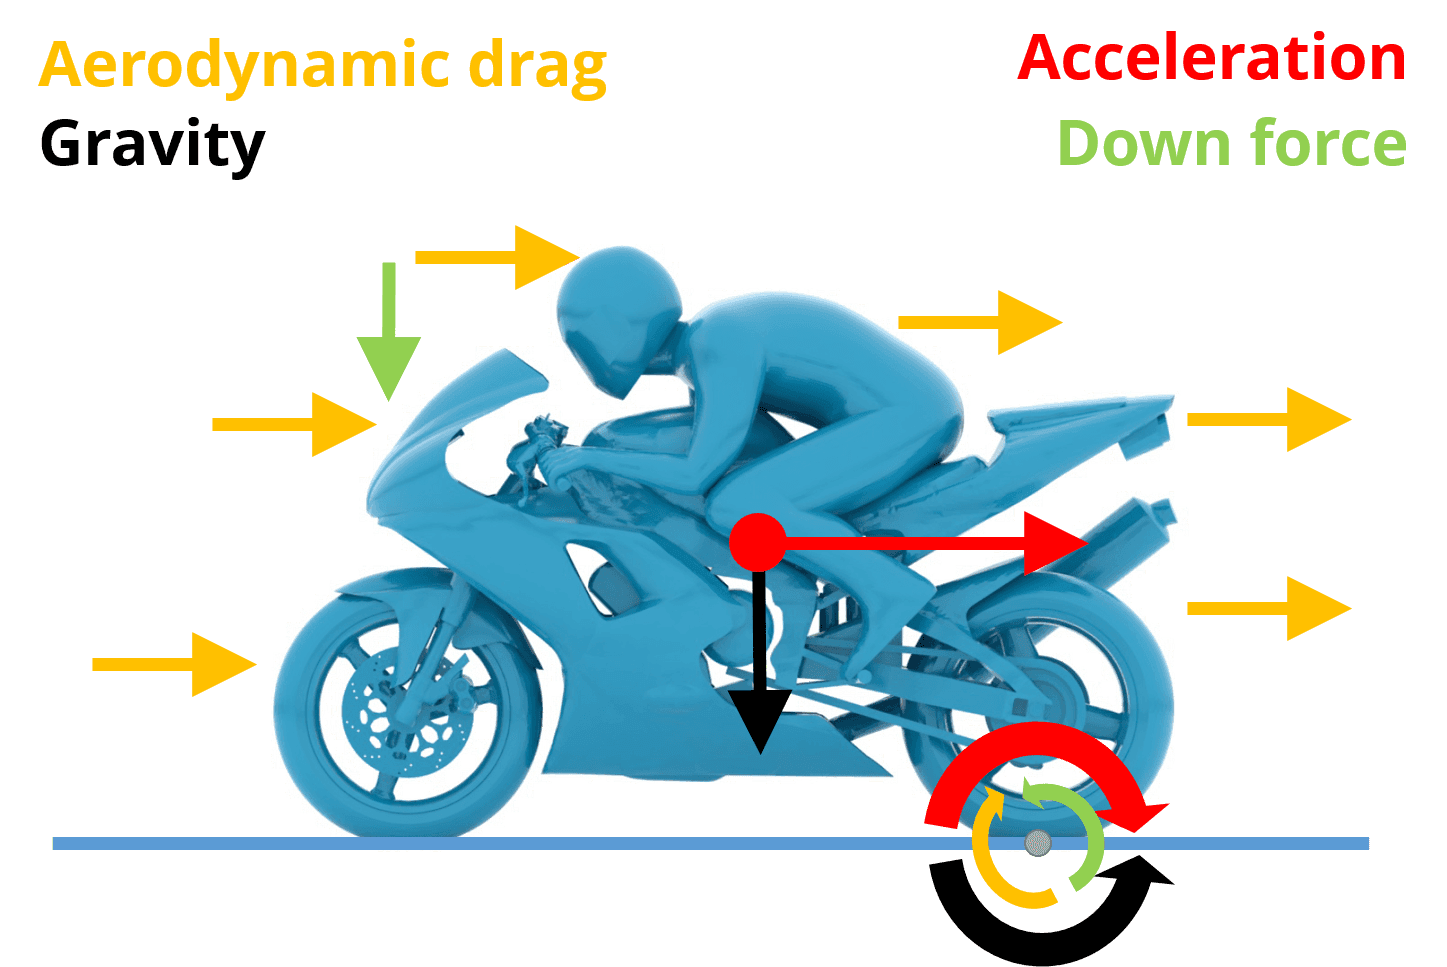 Illustration of the forces acting on a motorcycle with downforce